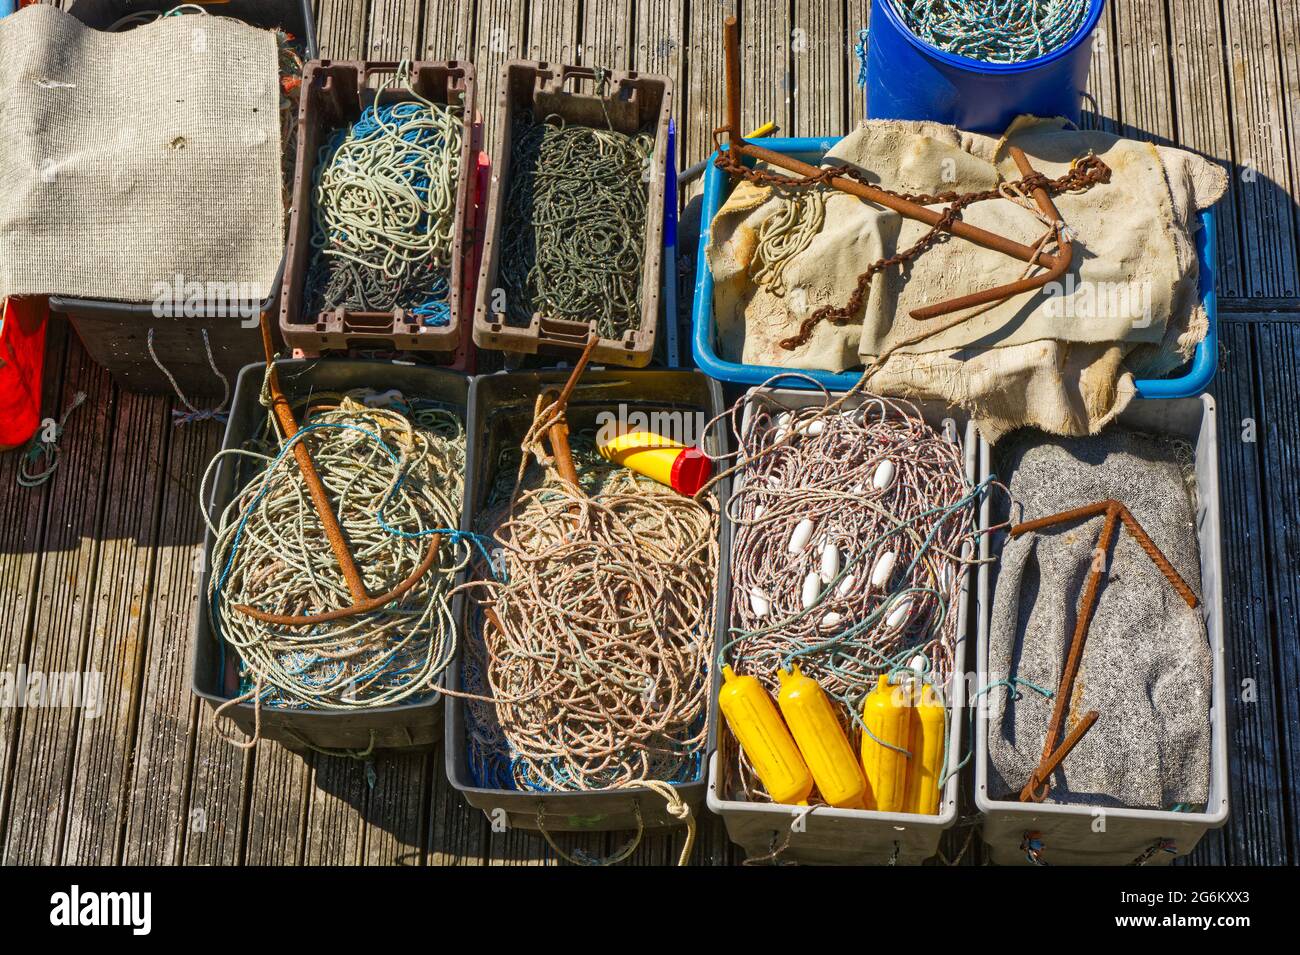 Commercial fishing gear at Marina, Brighton, East Sussex, England Stock Photo